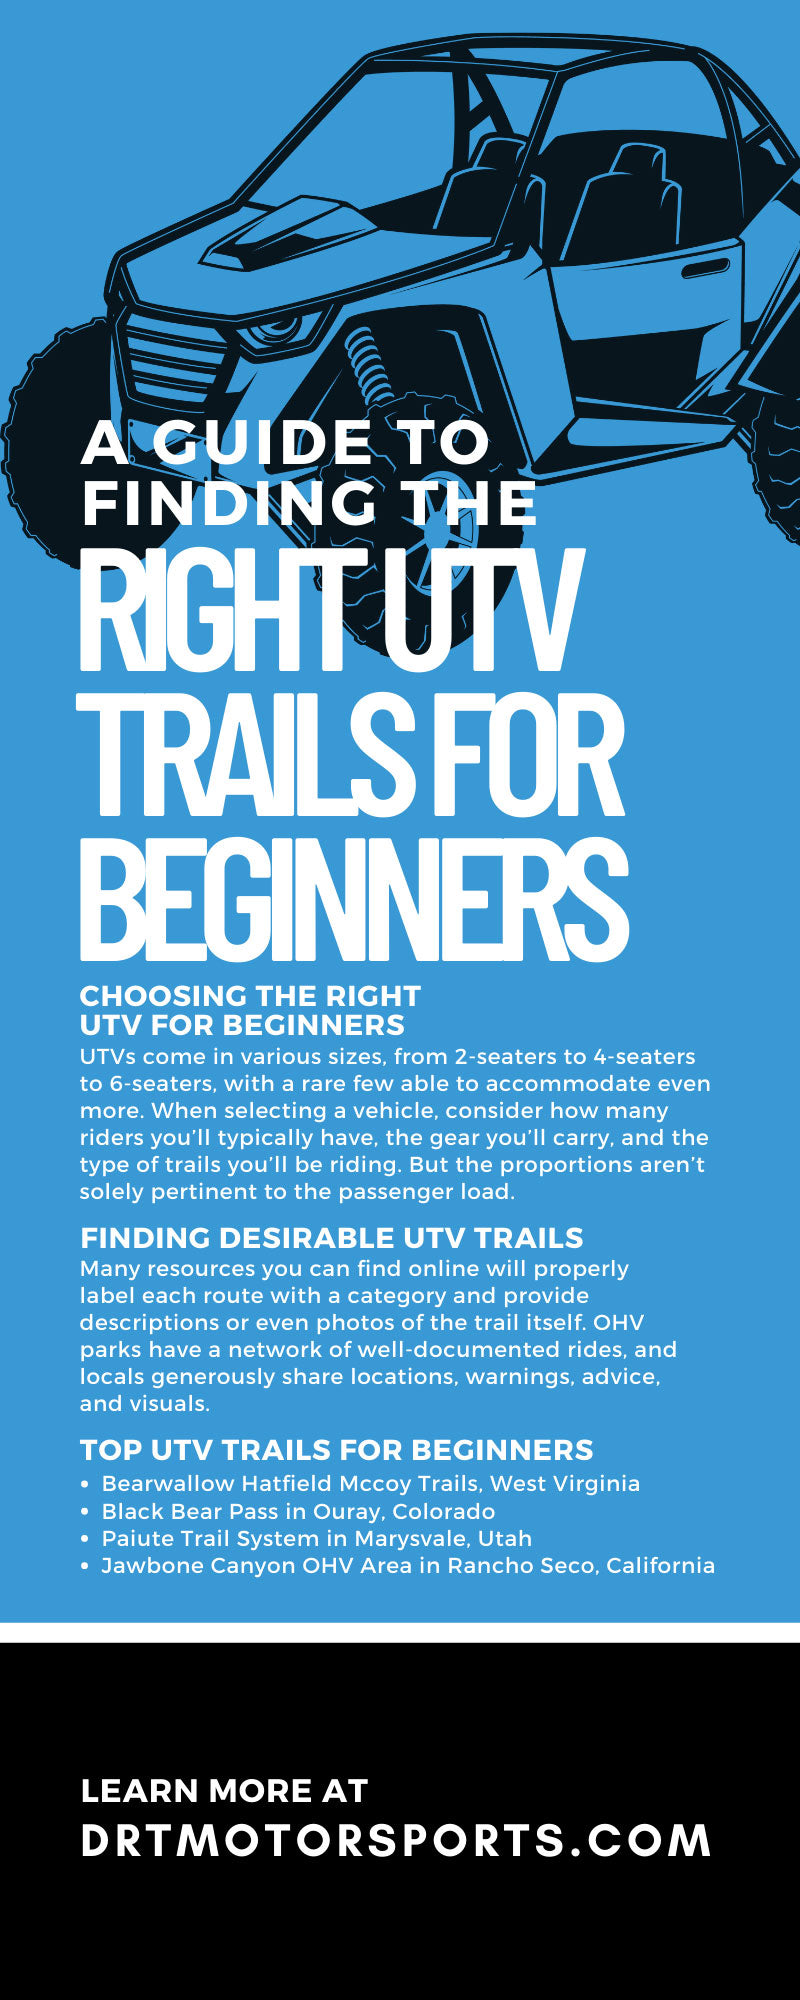 A Guide To Finding the Right UTV Trails for Beginners